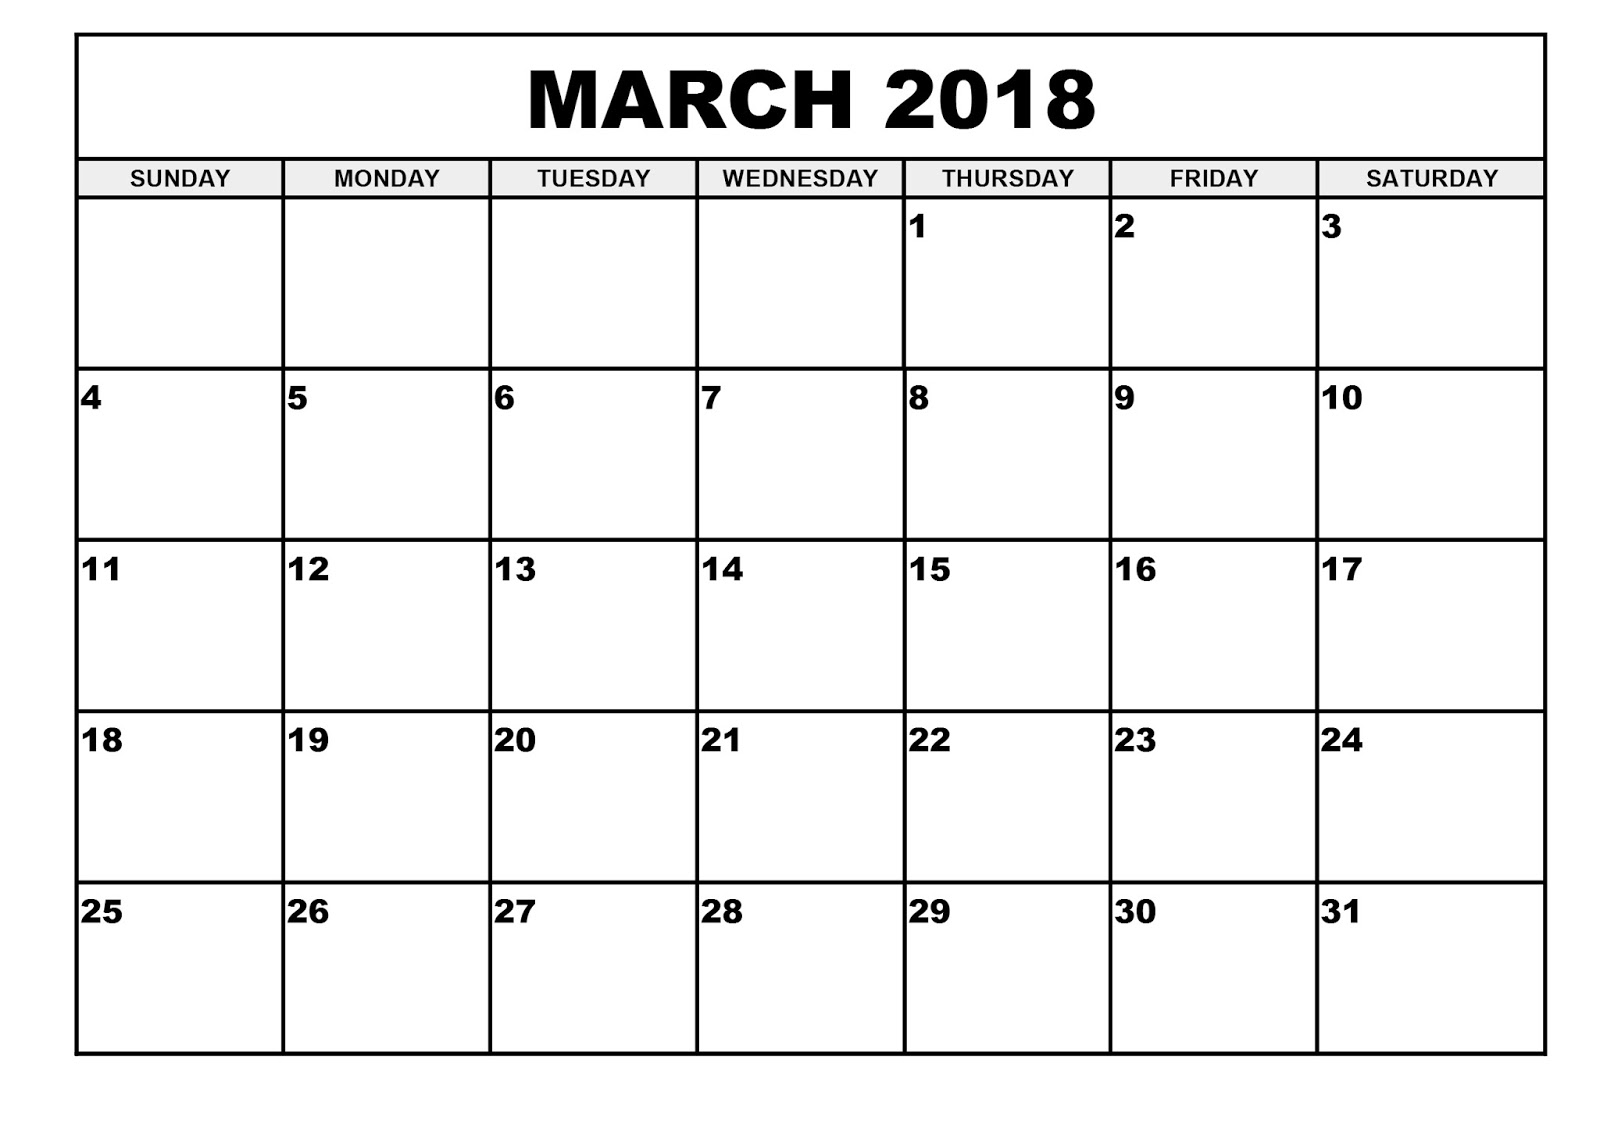 march-calendar-2018-template-free-pdf-download-oppidan-library